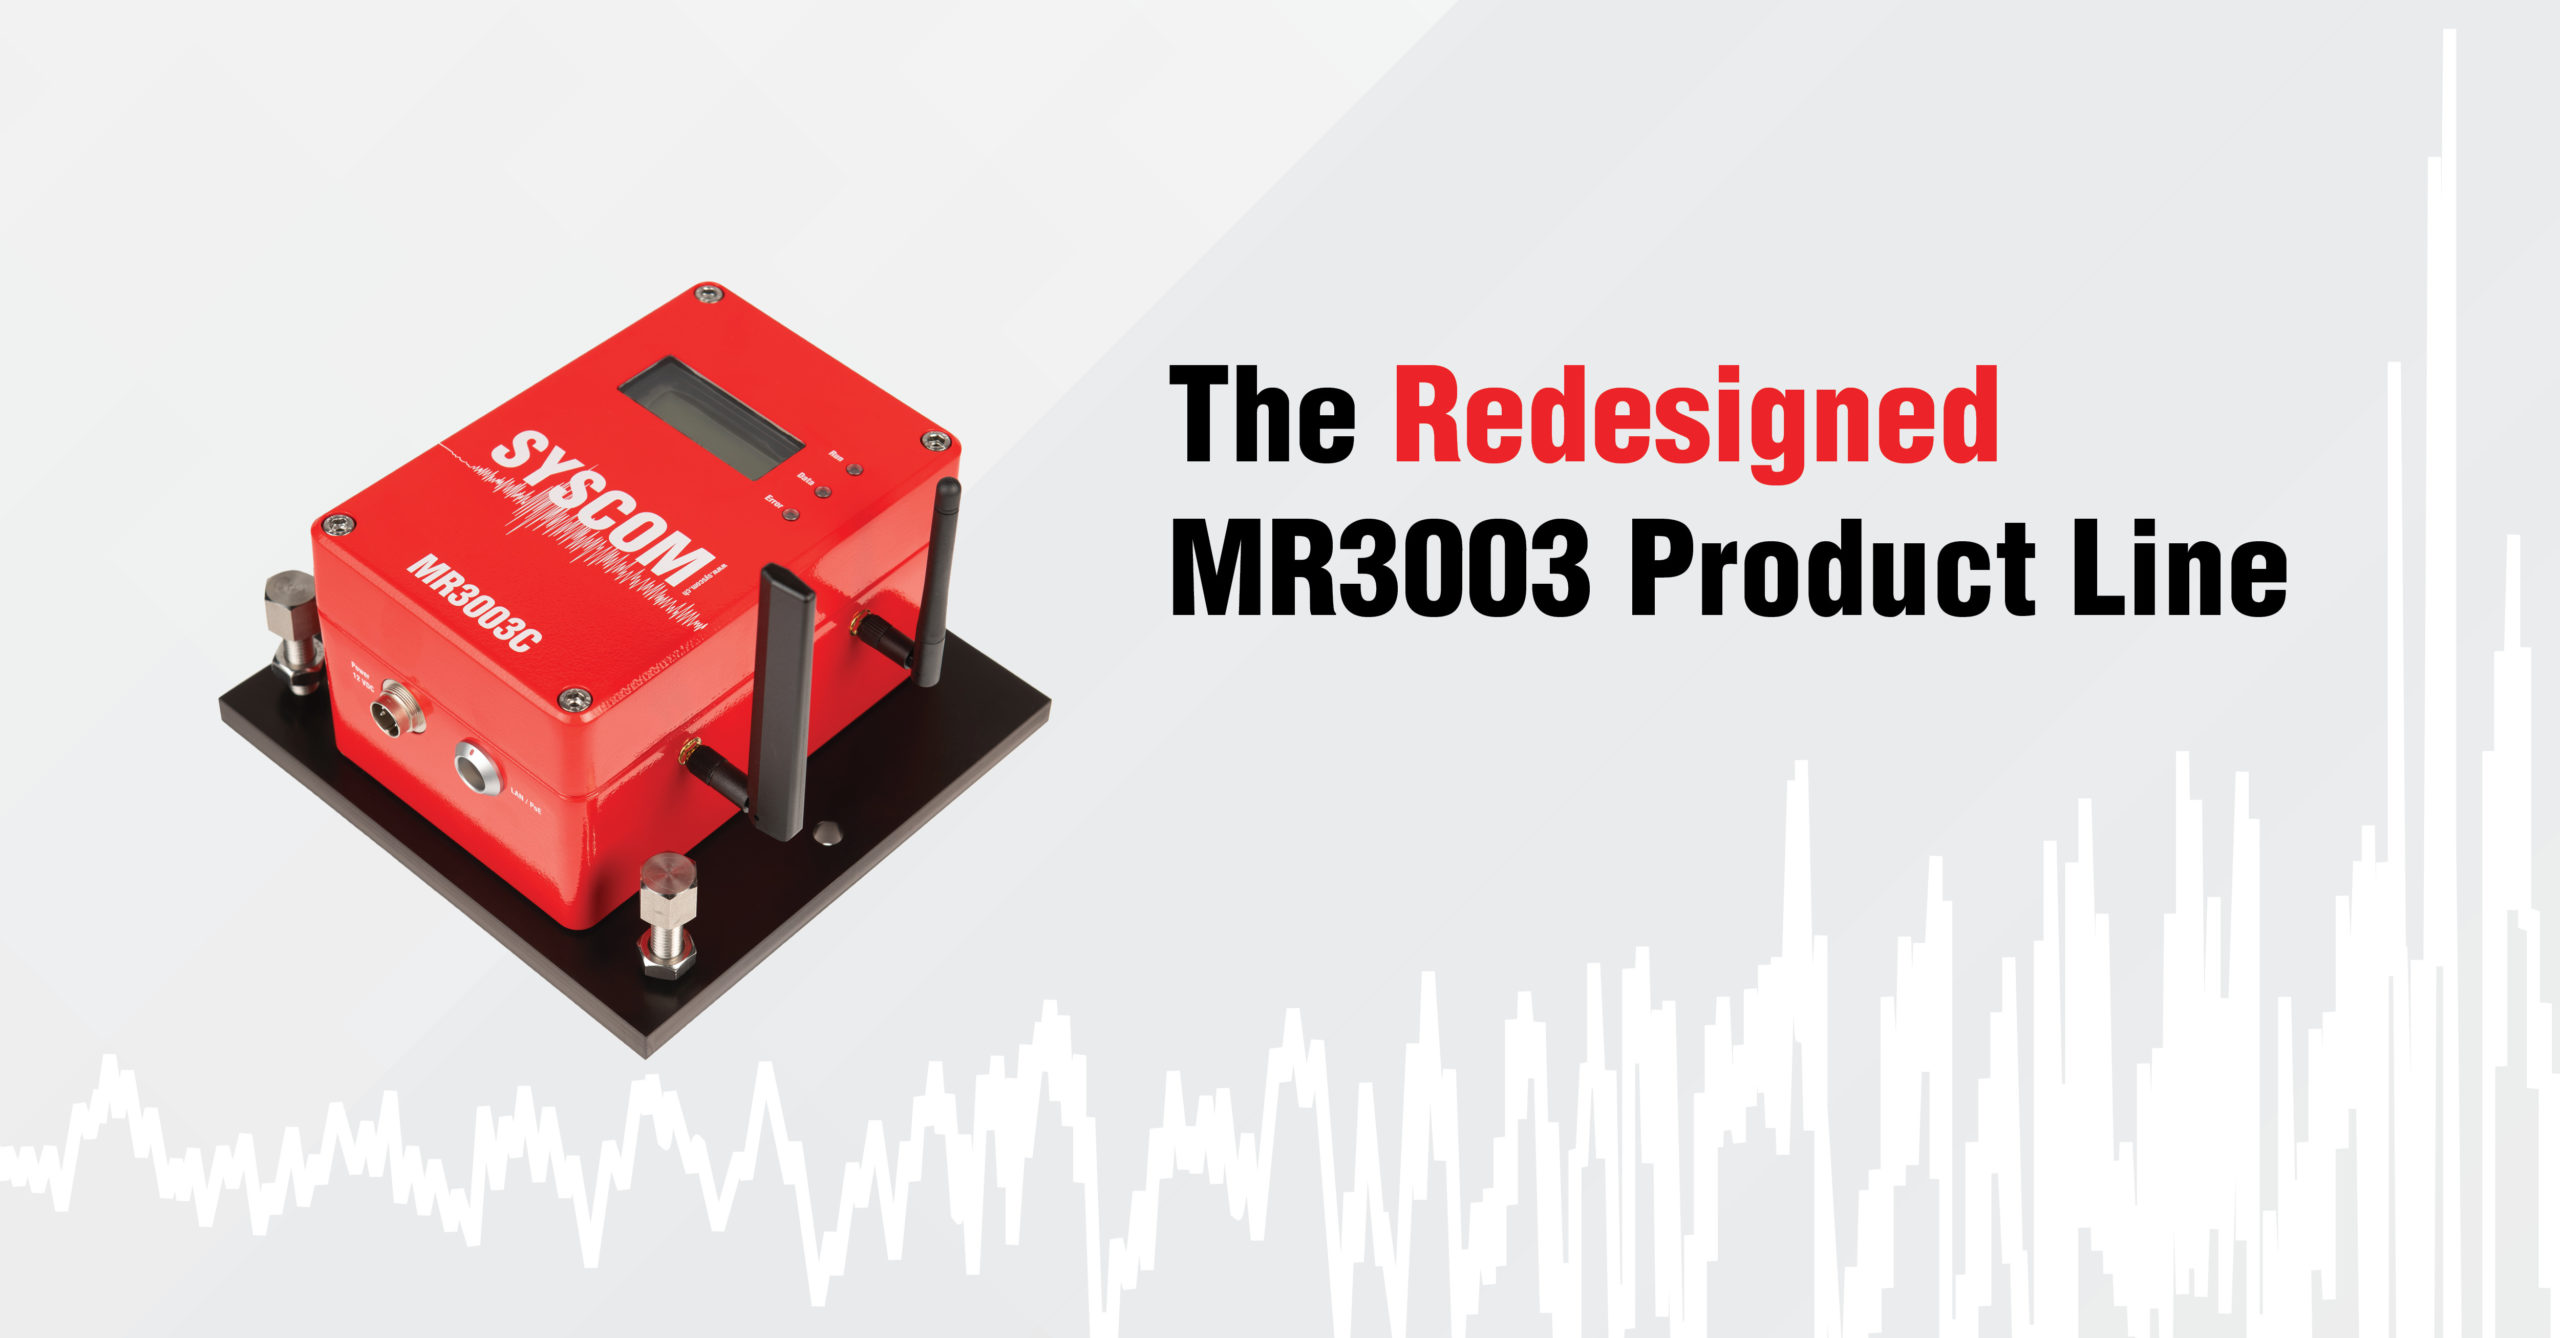 Leader in vibration and seismic monitoring devices launches redesigned flagship motion recording product line